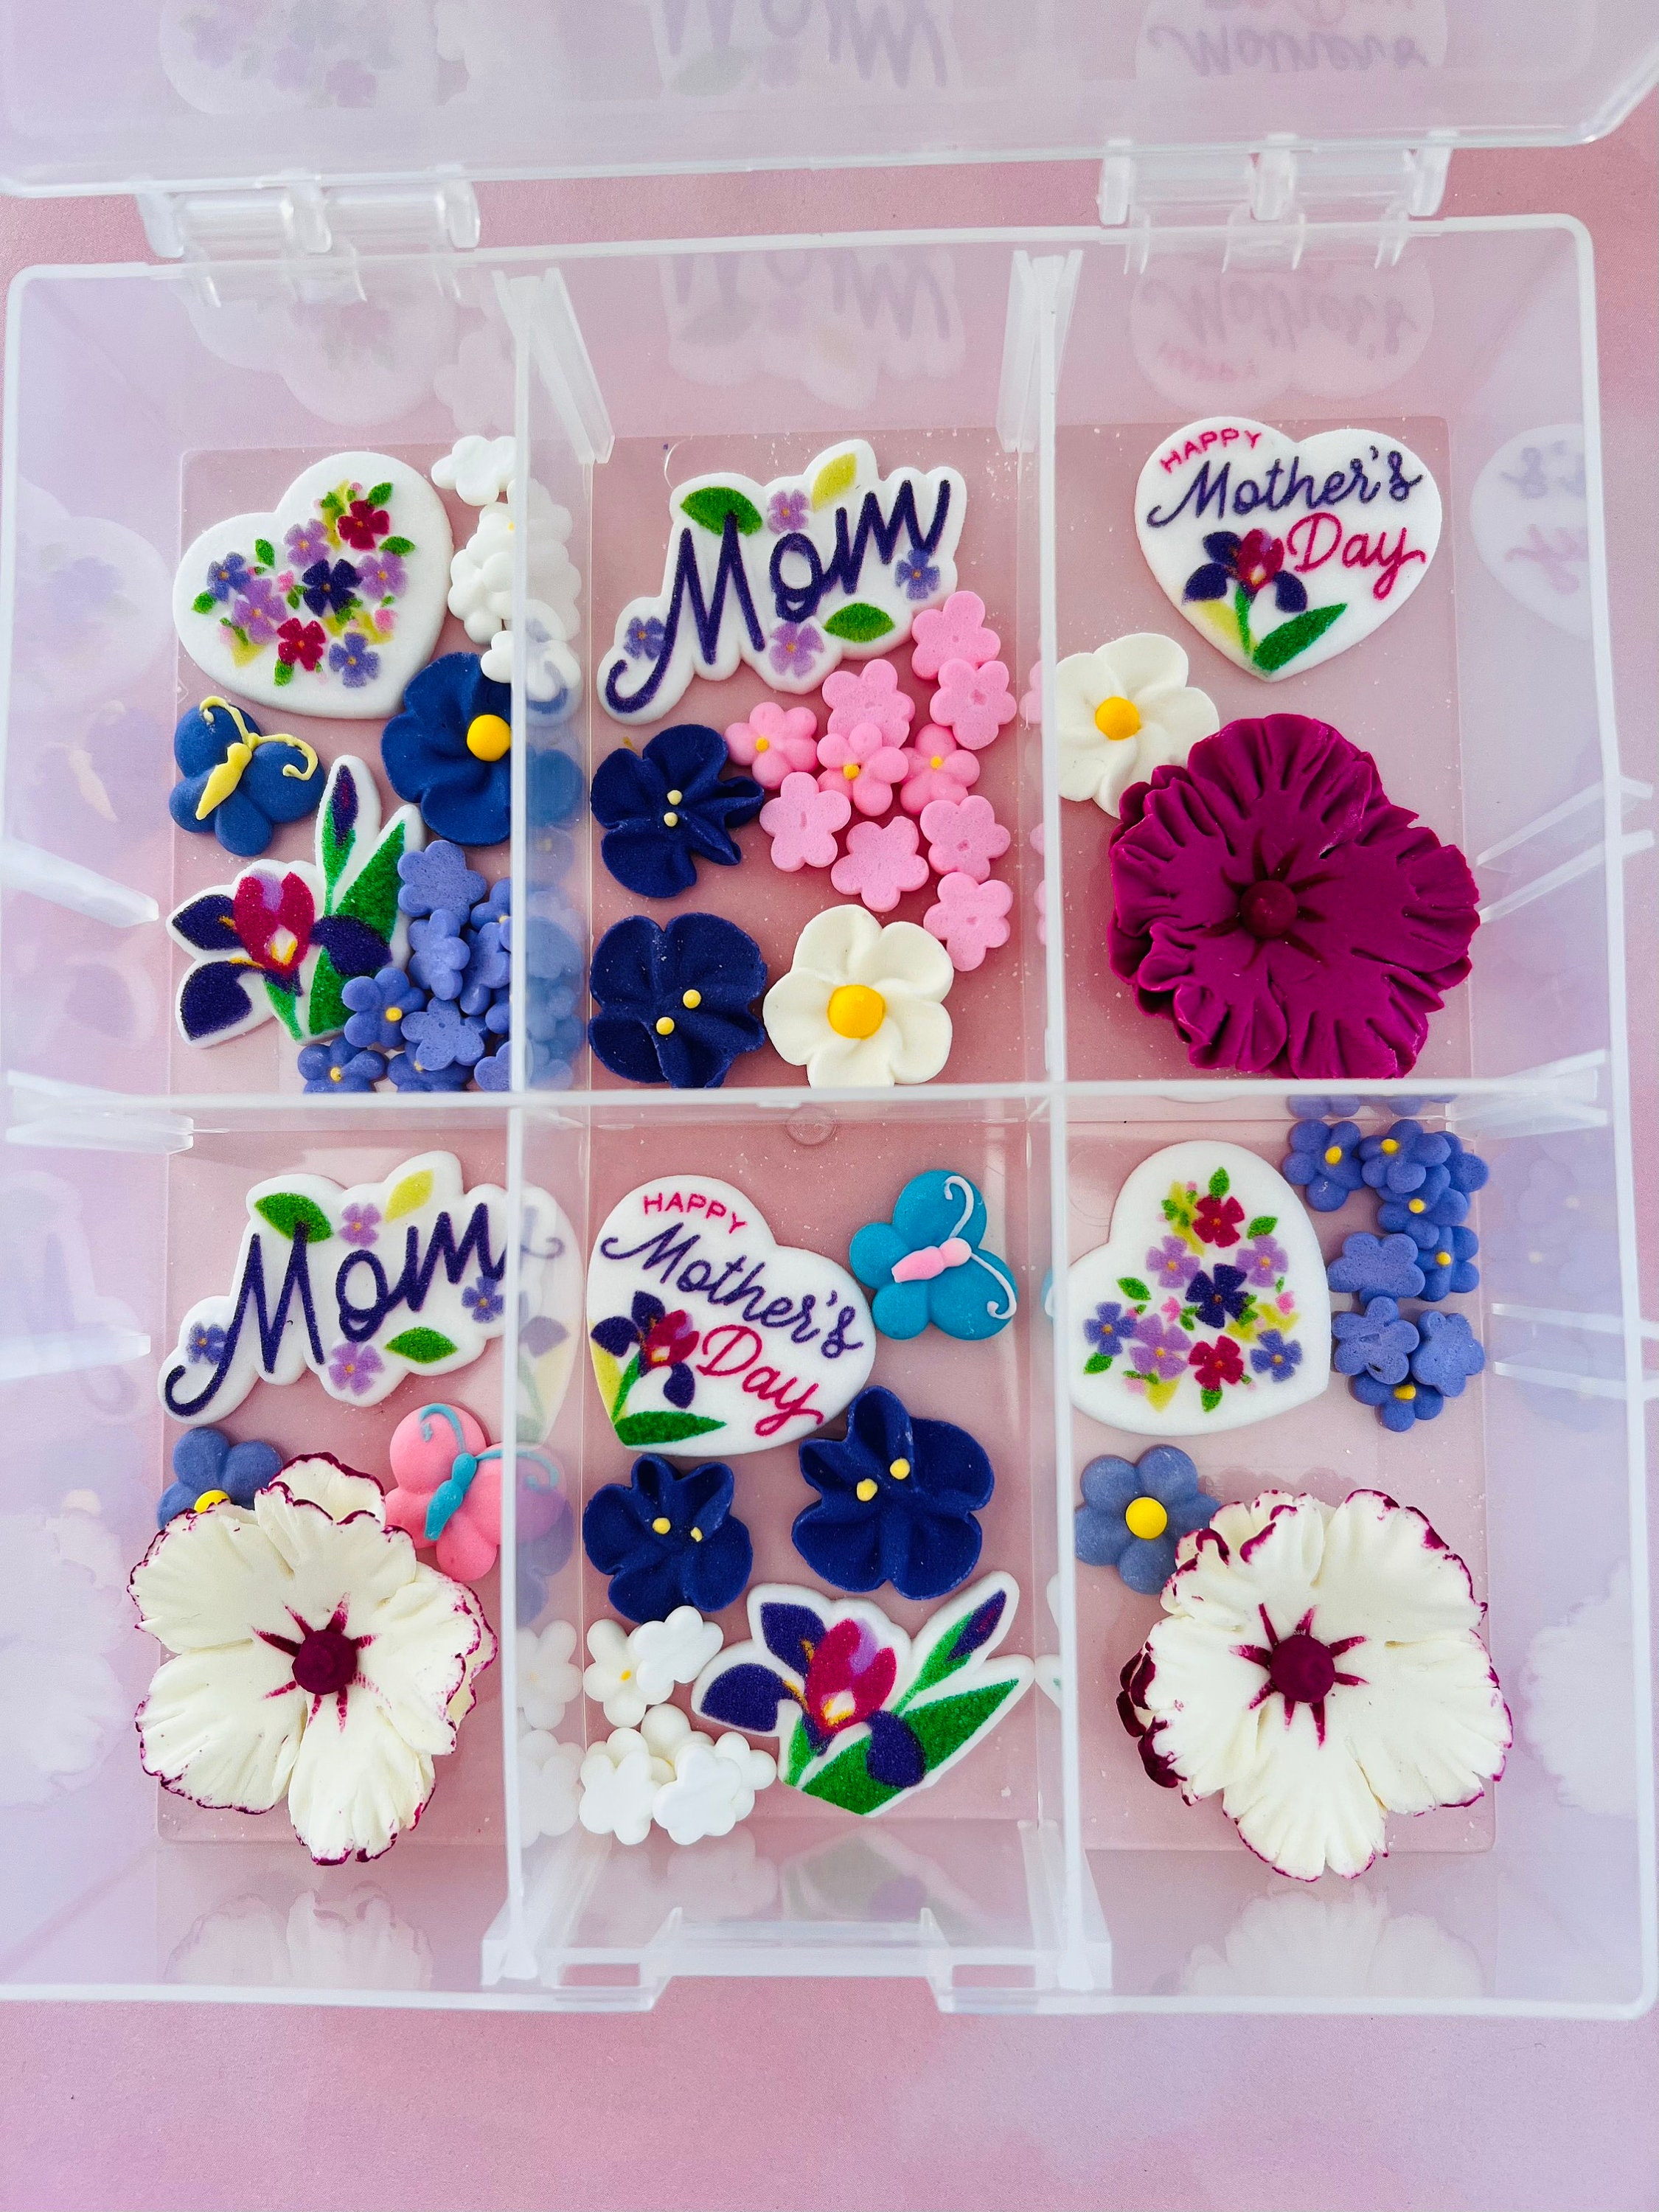 Personalized Mother's Day Craft Kit for Kids Children's Mother's